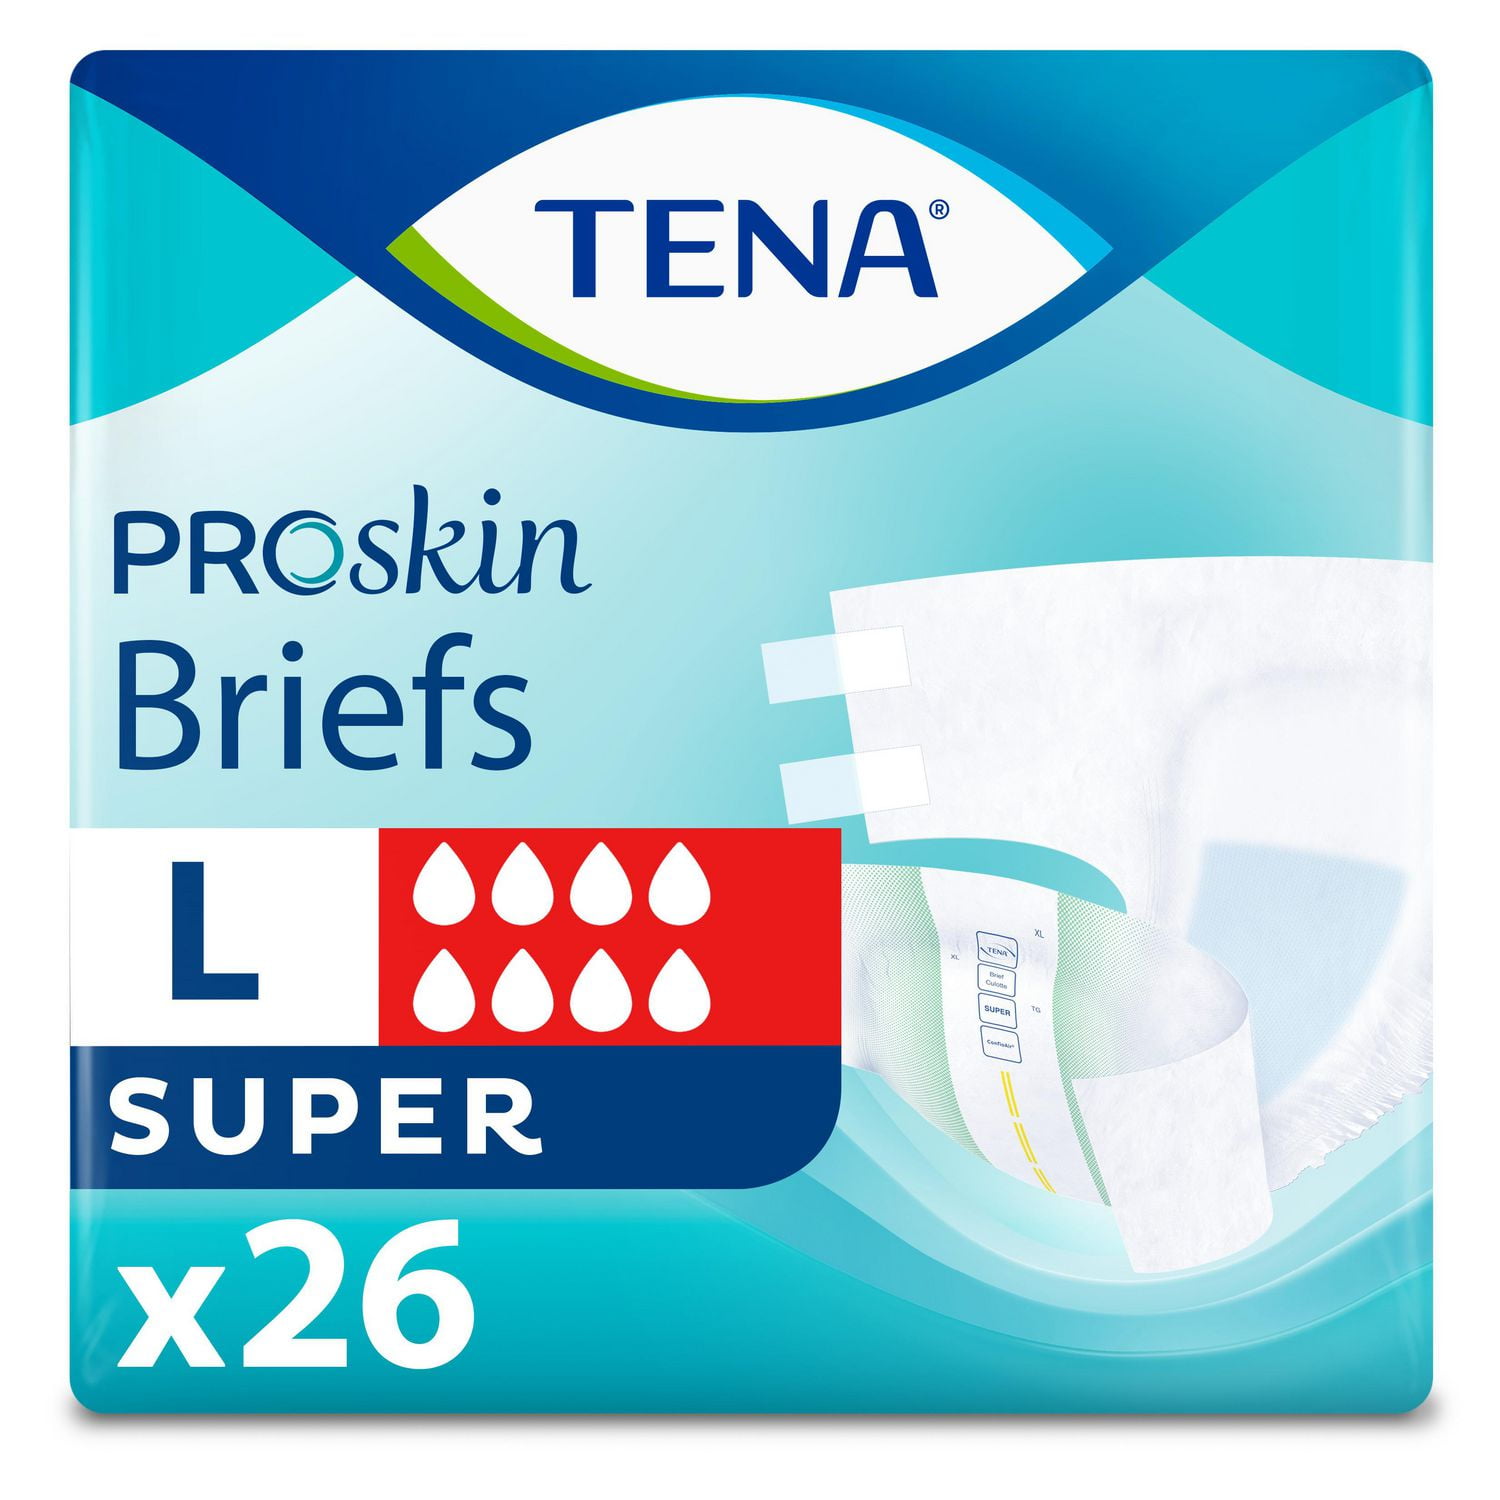 TENA Incontinence Briefs, Super Absorbency, Large, 26 Count, 26